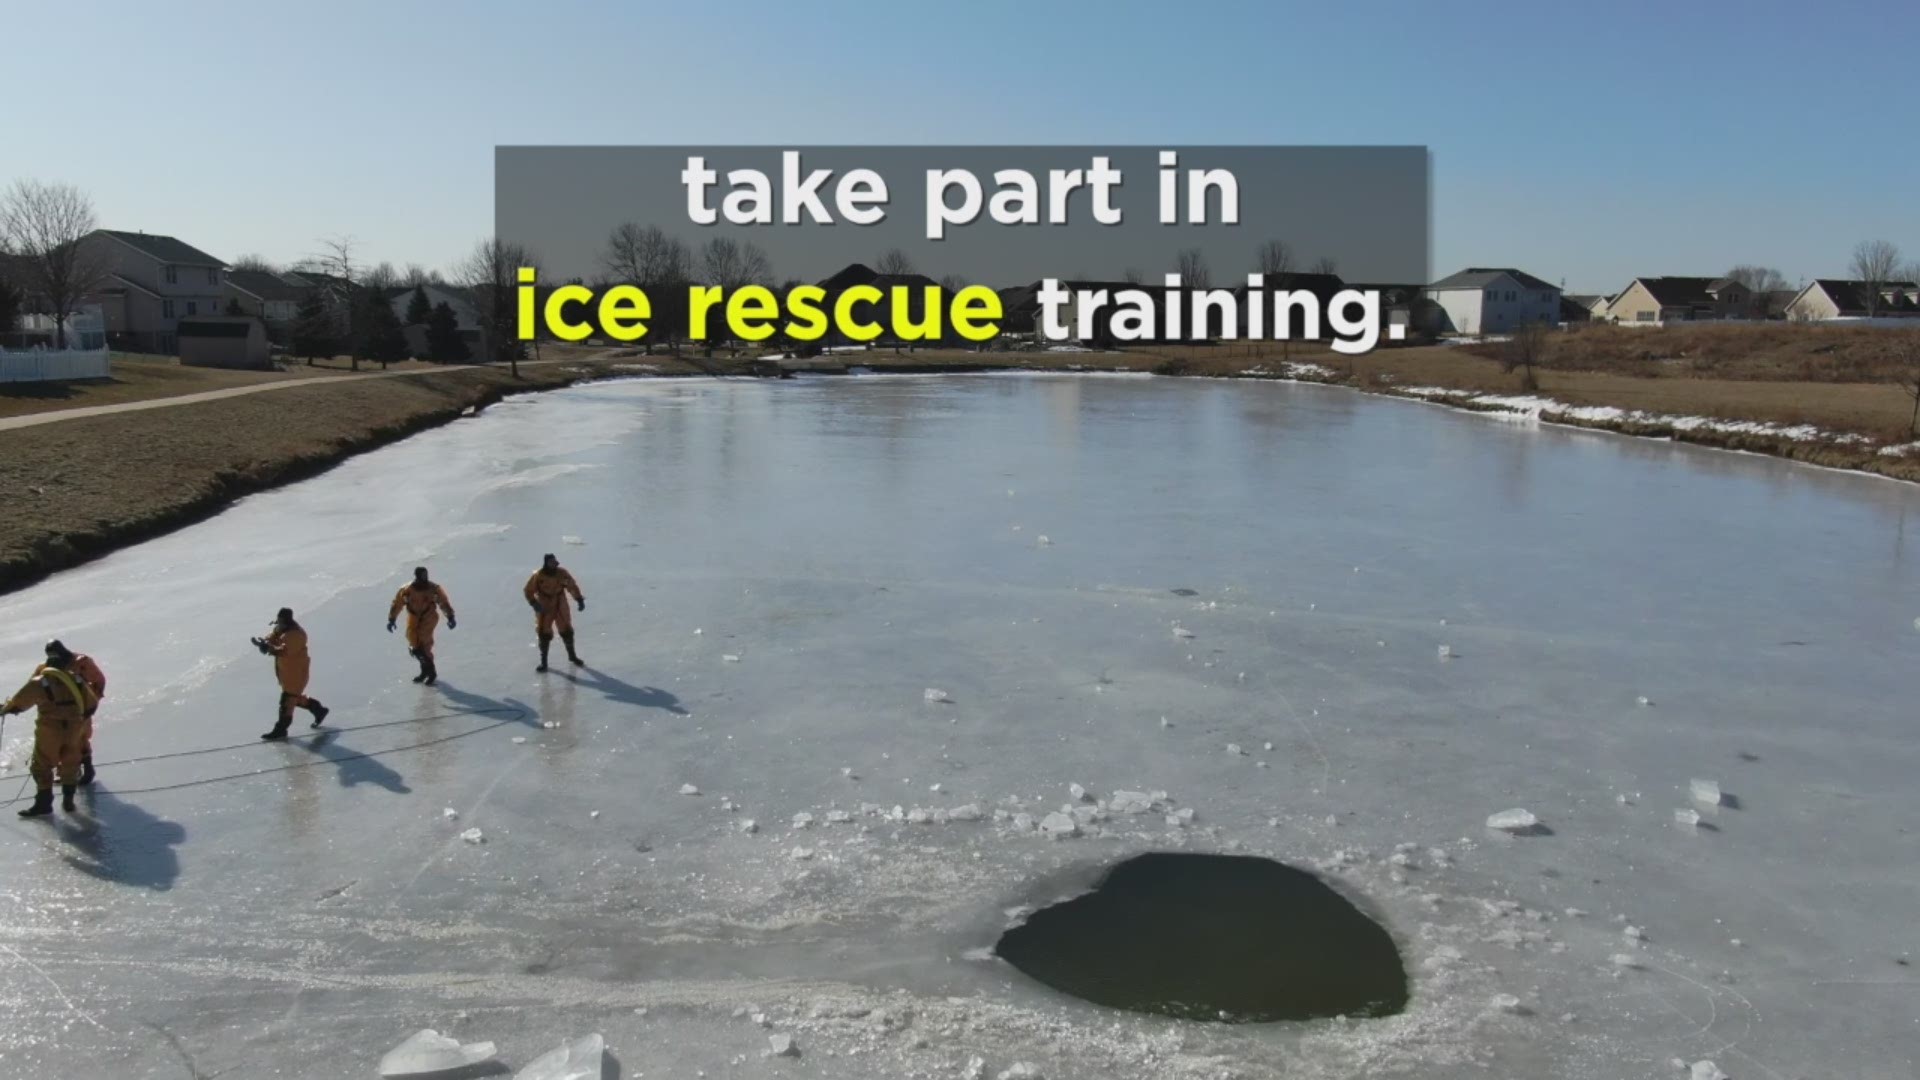 Each year firefighters practice different ice rescue techniques.